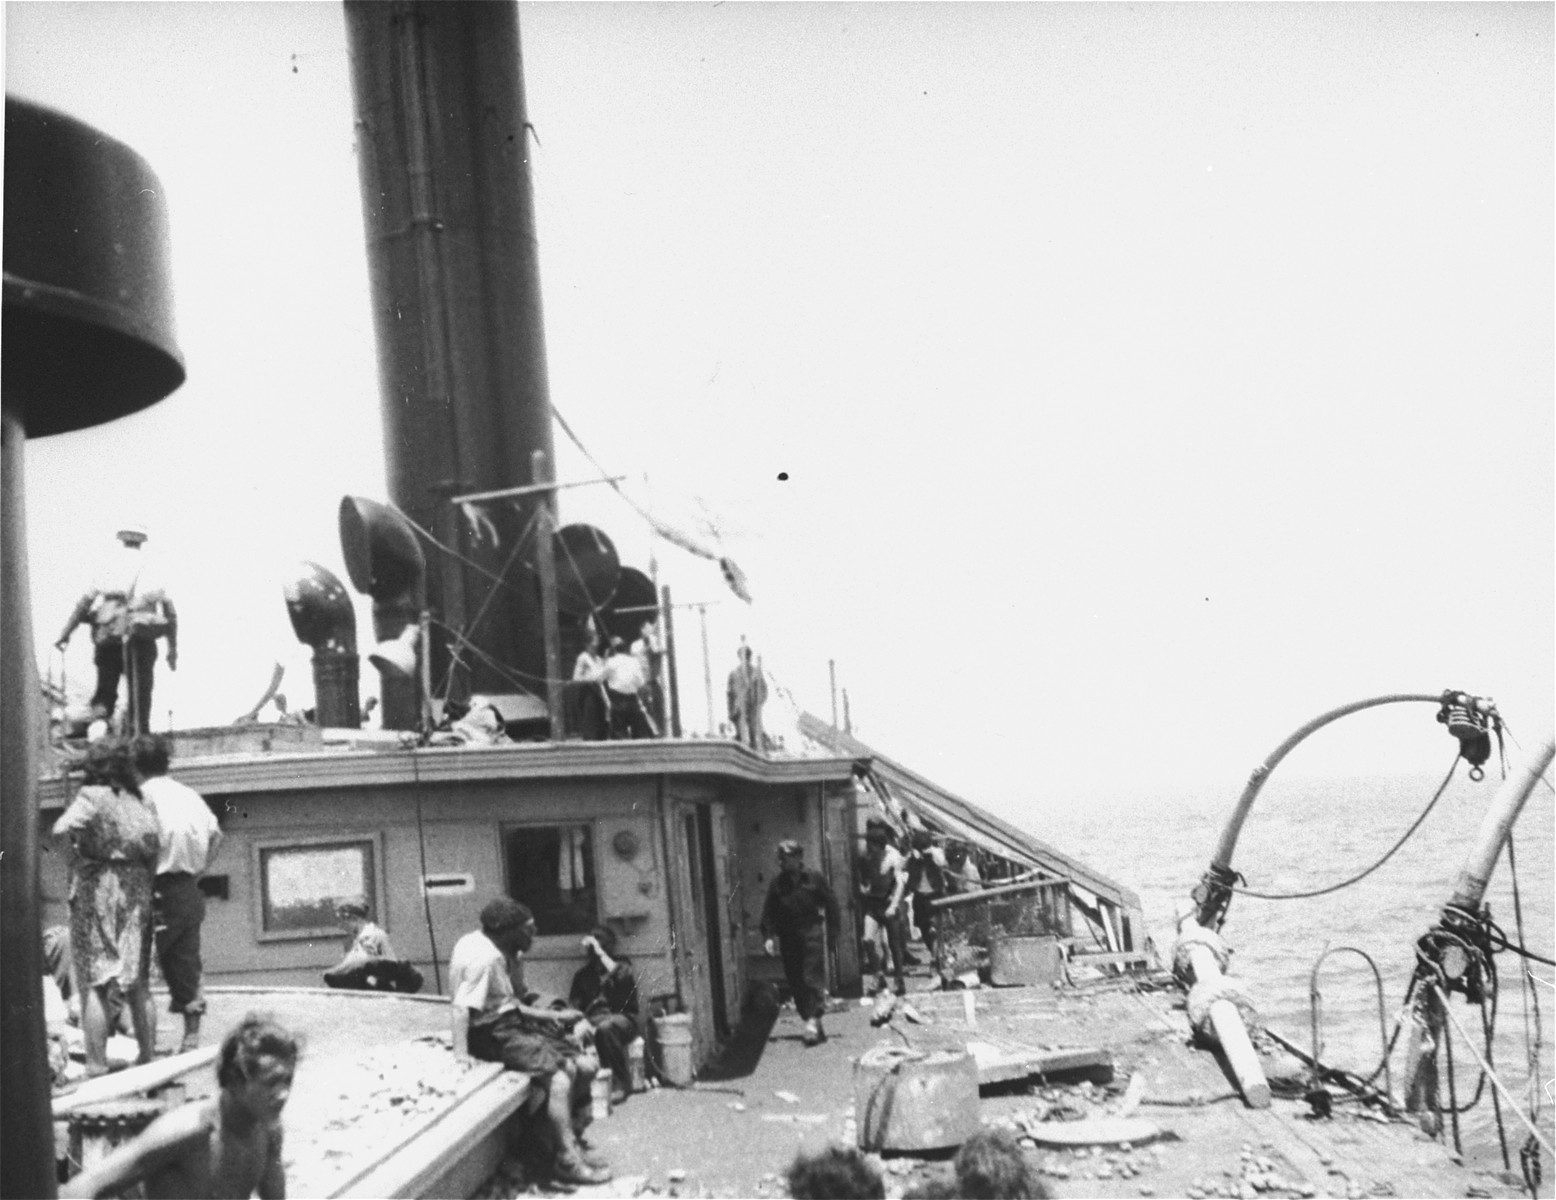 Jewish passengers stand on the deck of the Exodus 1947 amidst the debris from the previous night's struggle.